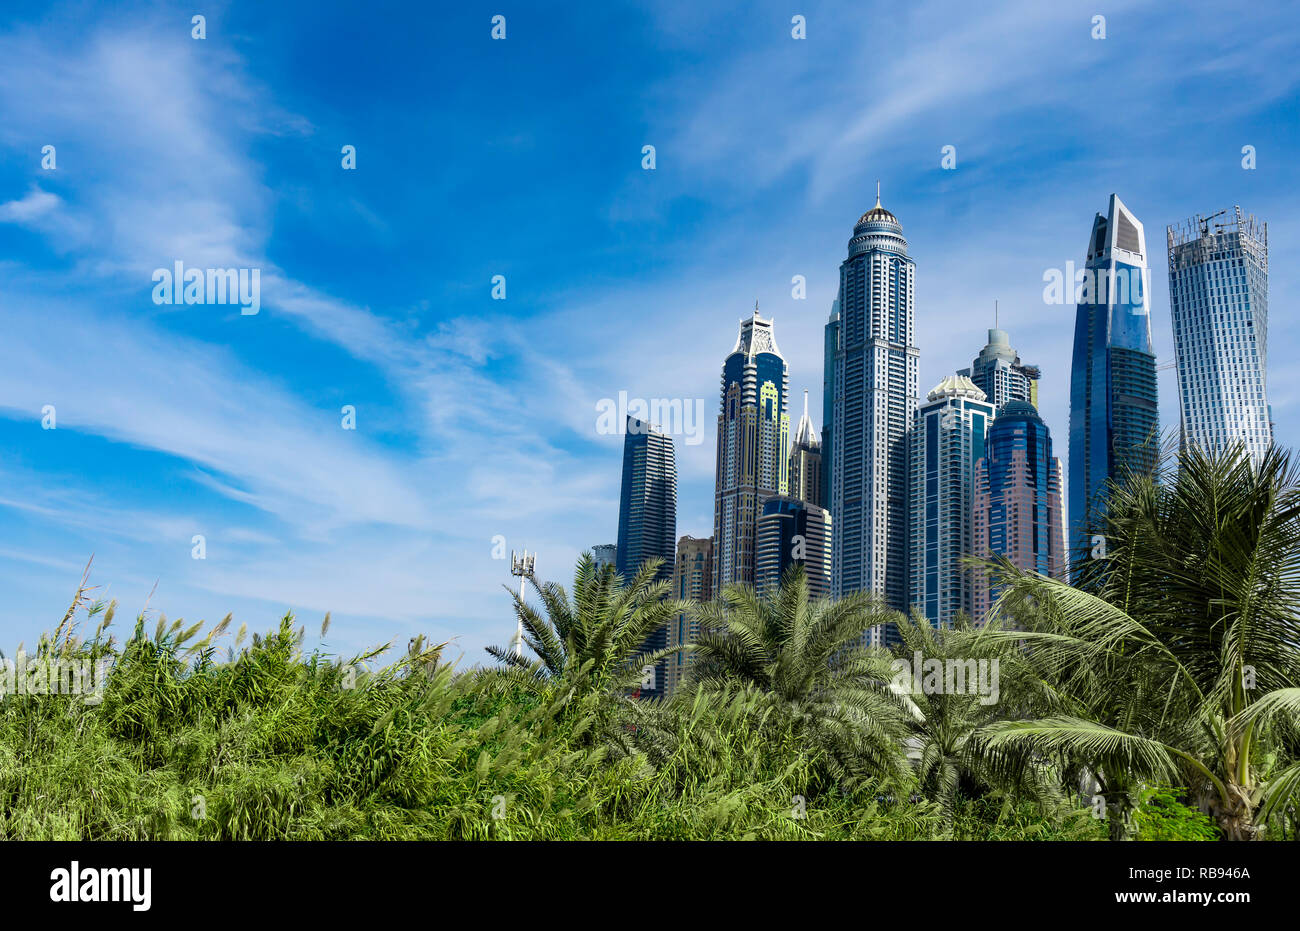 Dubai skyscraper skyline with palm trees blue sky and space for text Stock Photo